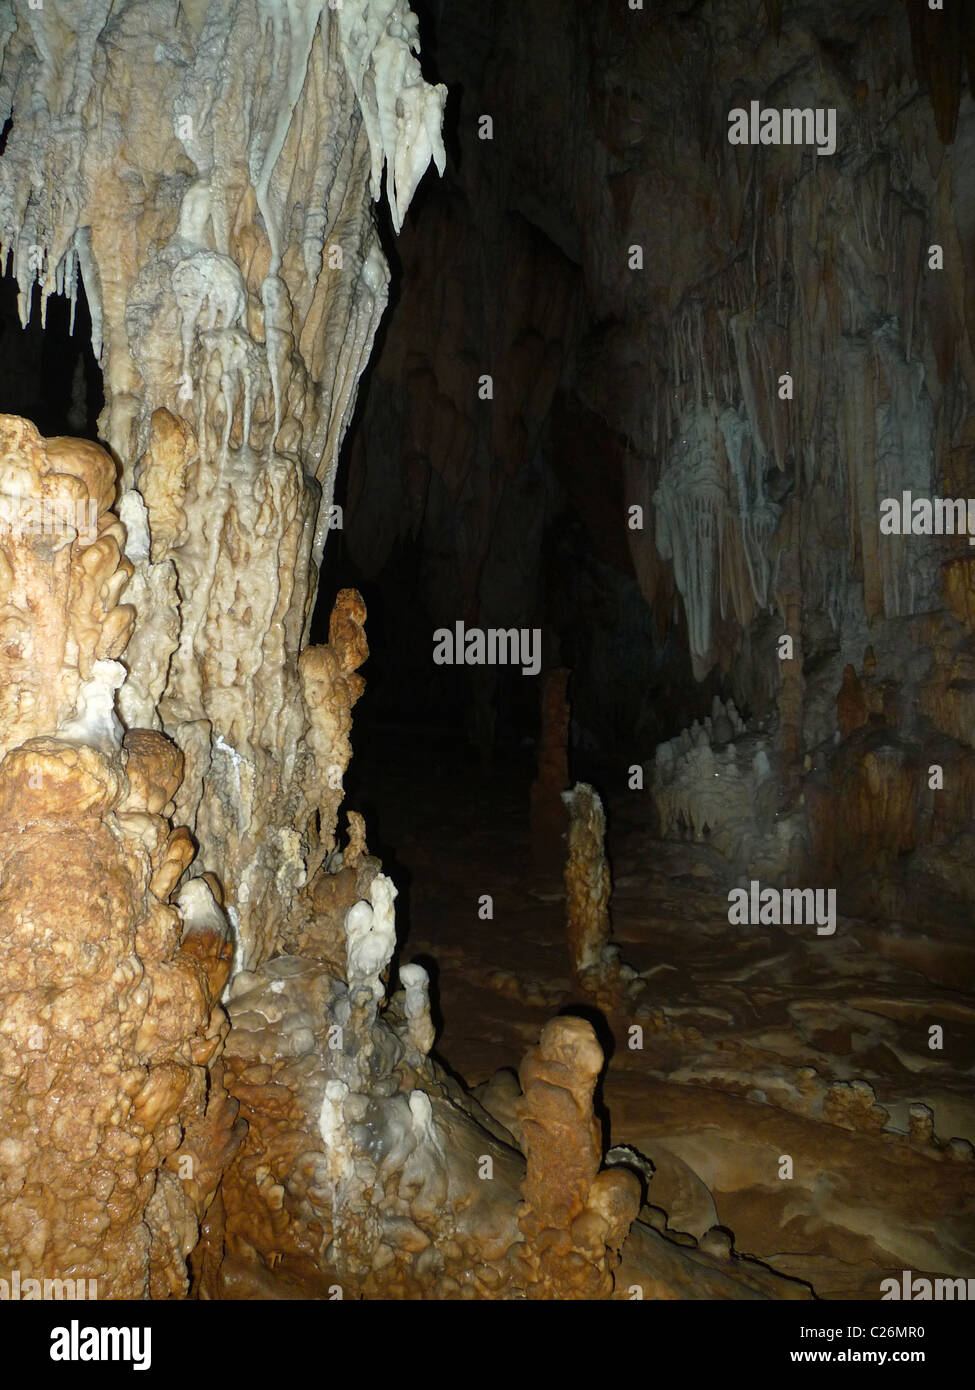 Rock Formations In Atm Actun Tunichil Muknal Cave In Belize Stock